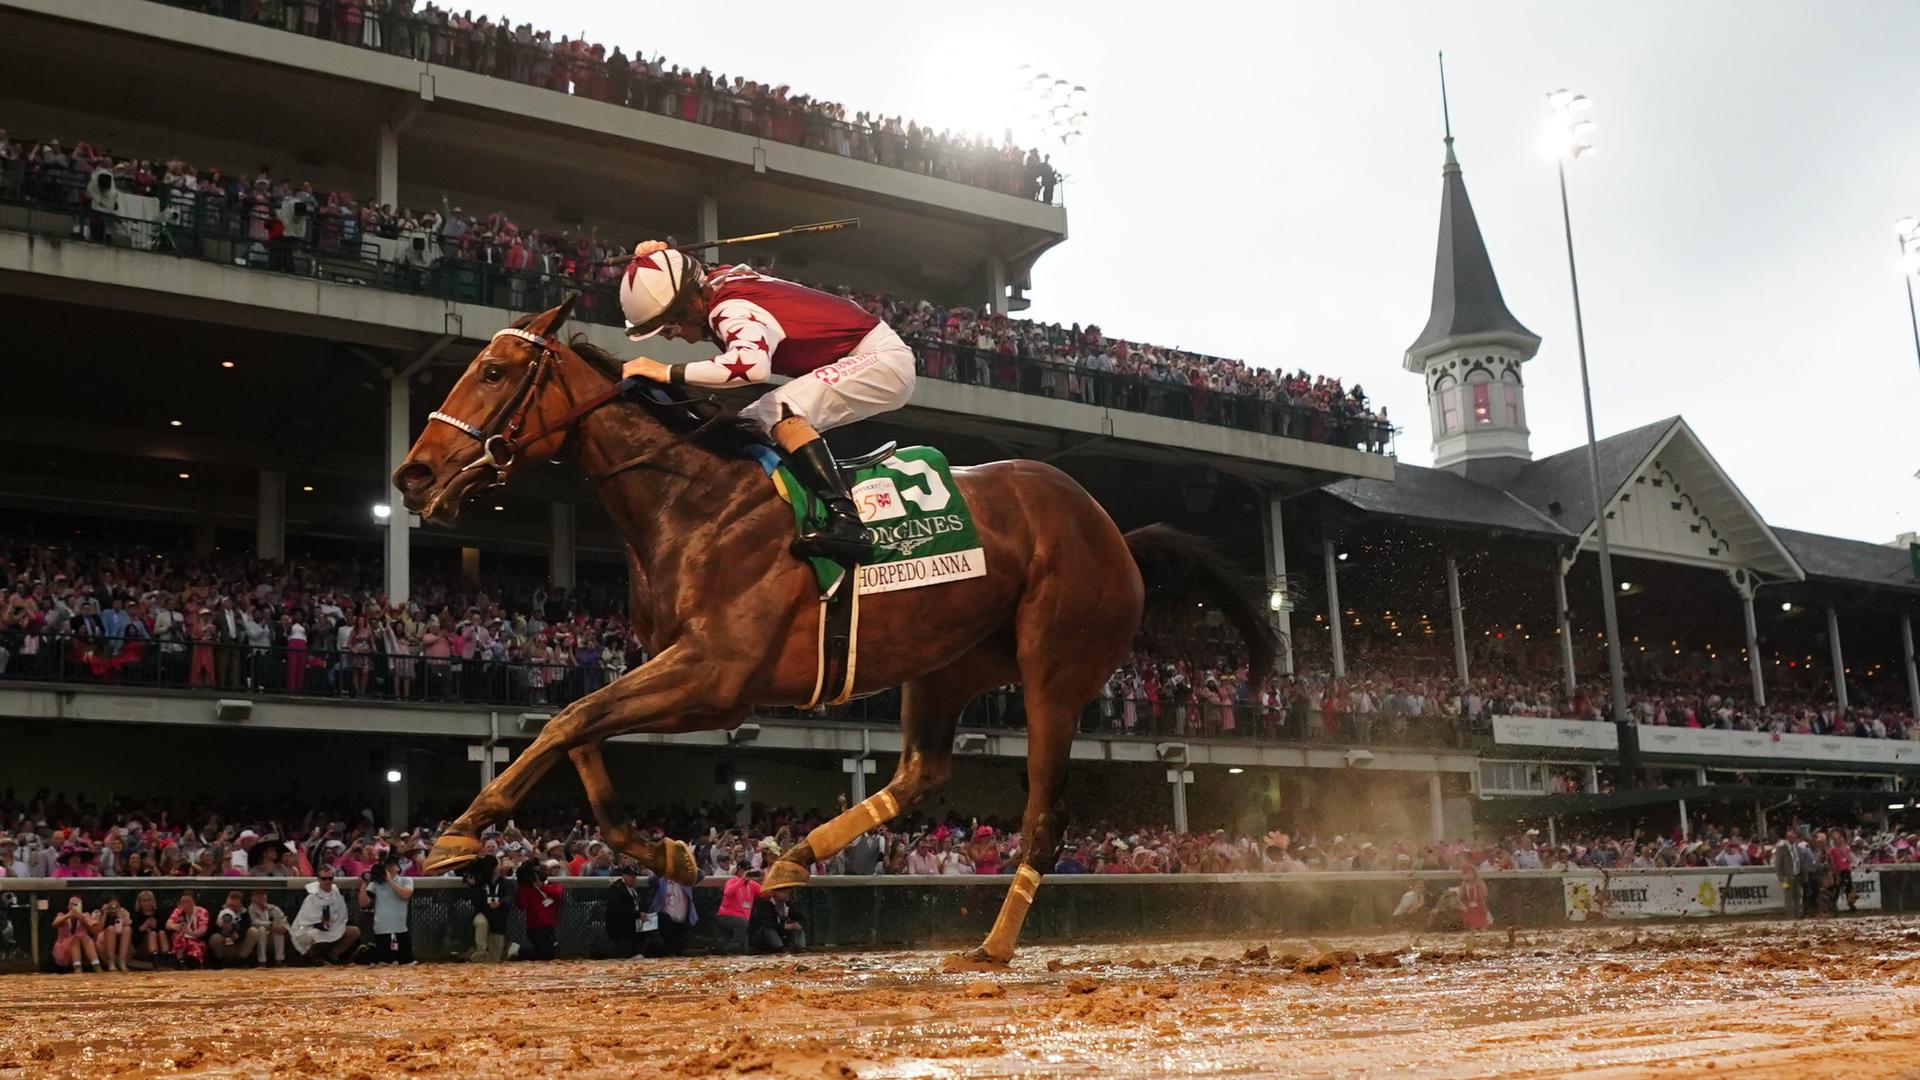 Thorpedo Anna wasn't the favorite to win the Kentucky Oaks, but dominated the sloppy track at Churchill Downs on Friday, May 3.